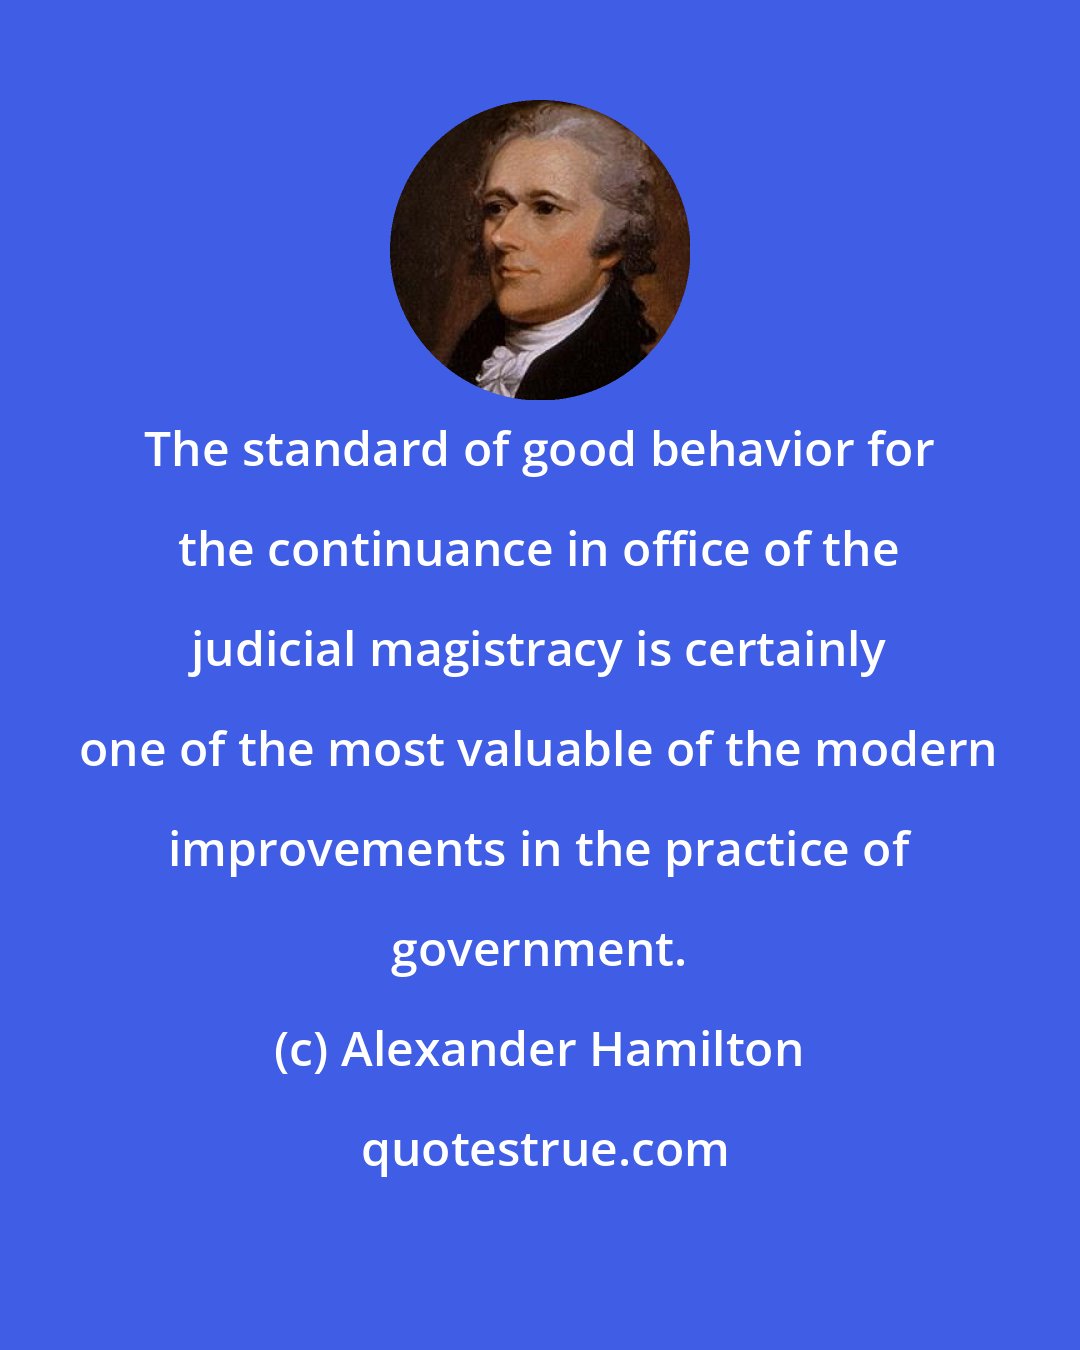 Alexander Hamilton: The standard of good behavior for the continuance in office of the judicial magistracy is certainly one of the most valuable of the modern improvements in the practice of government.